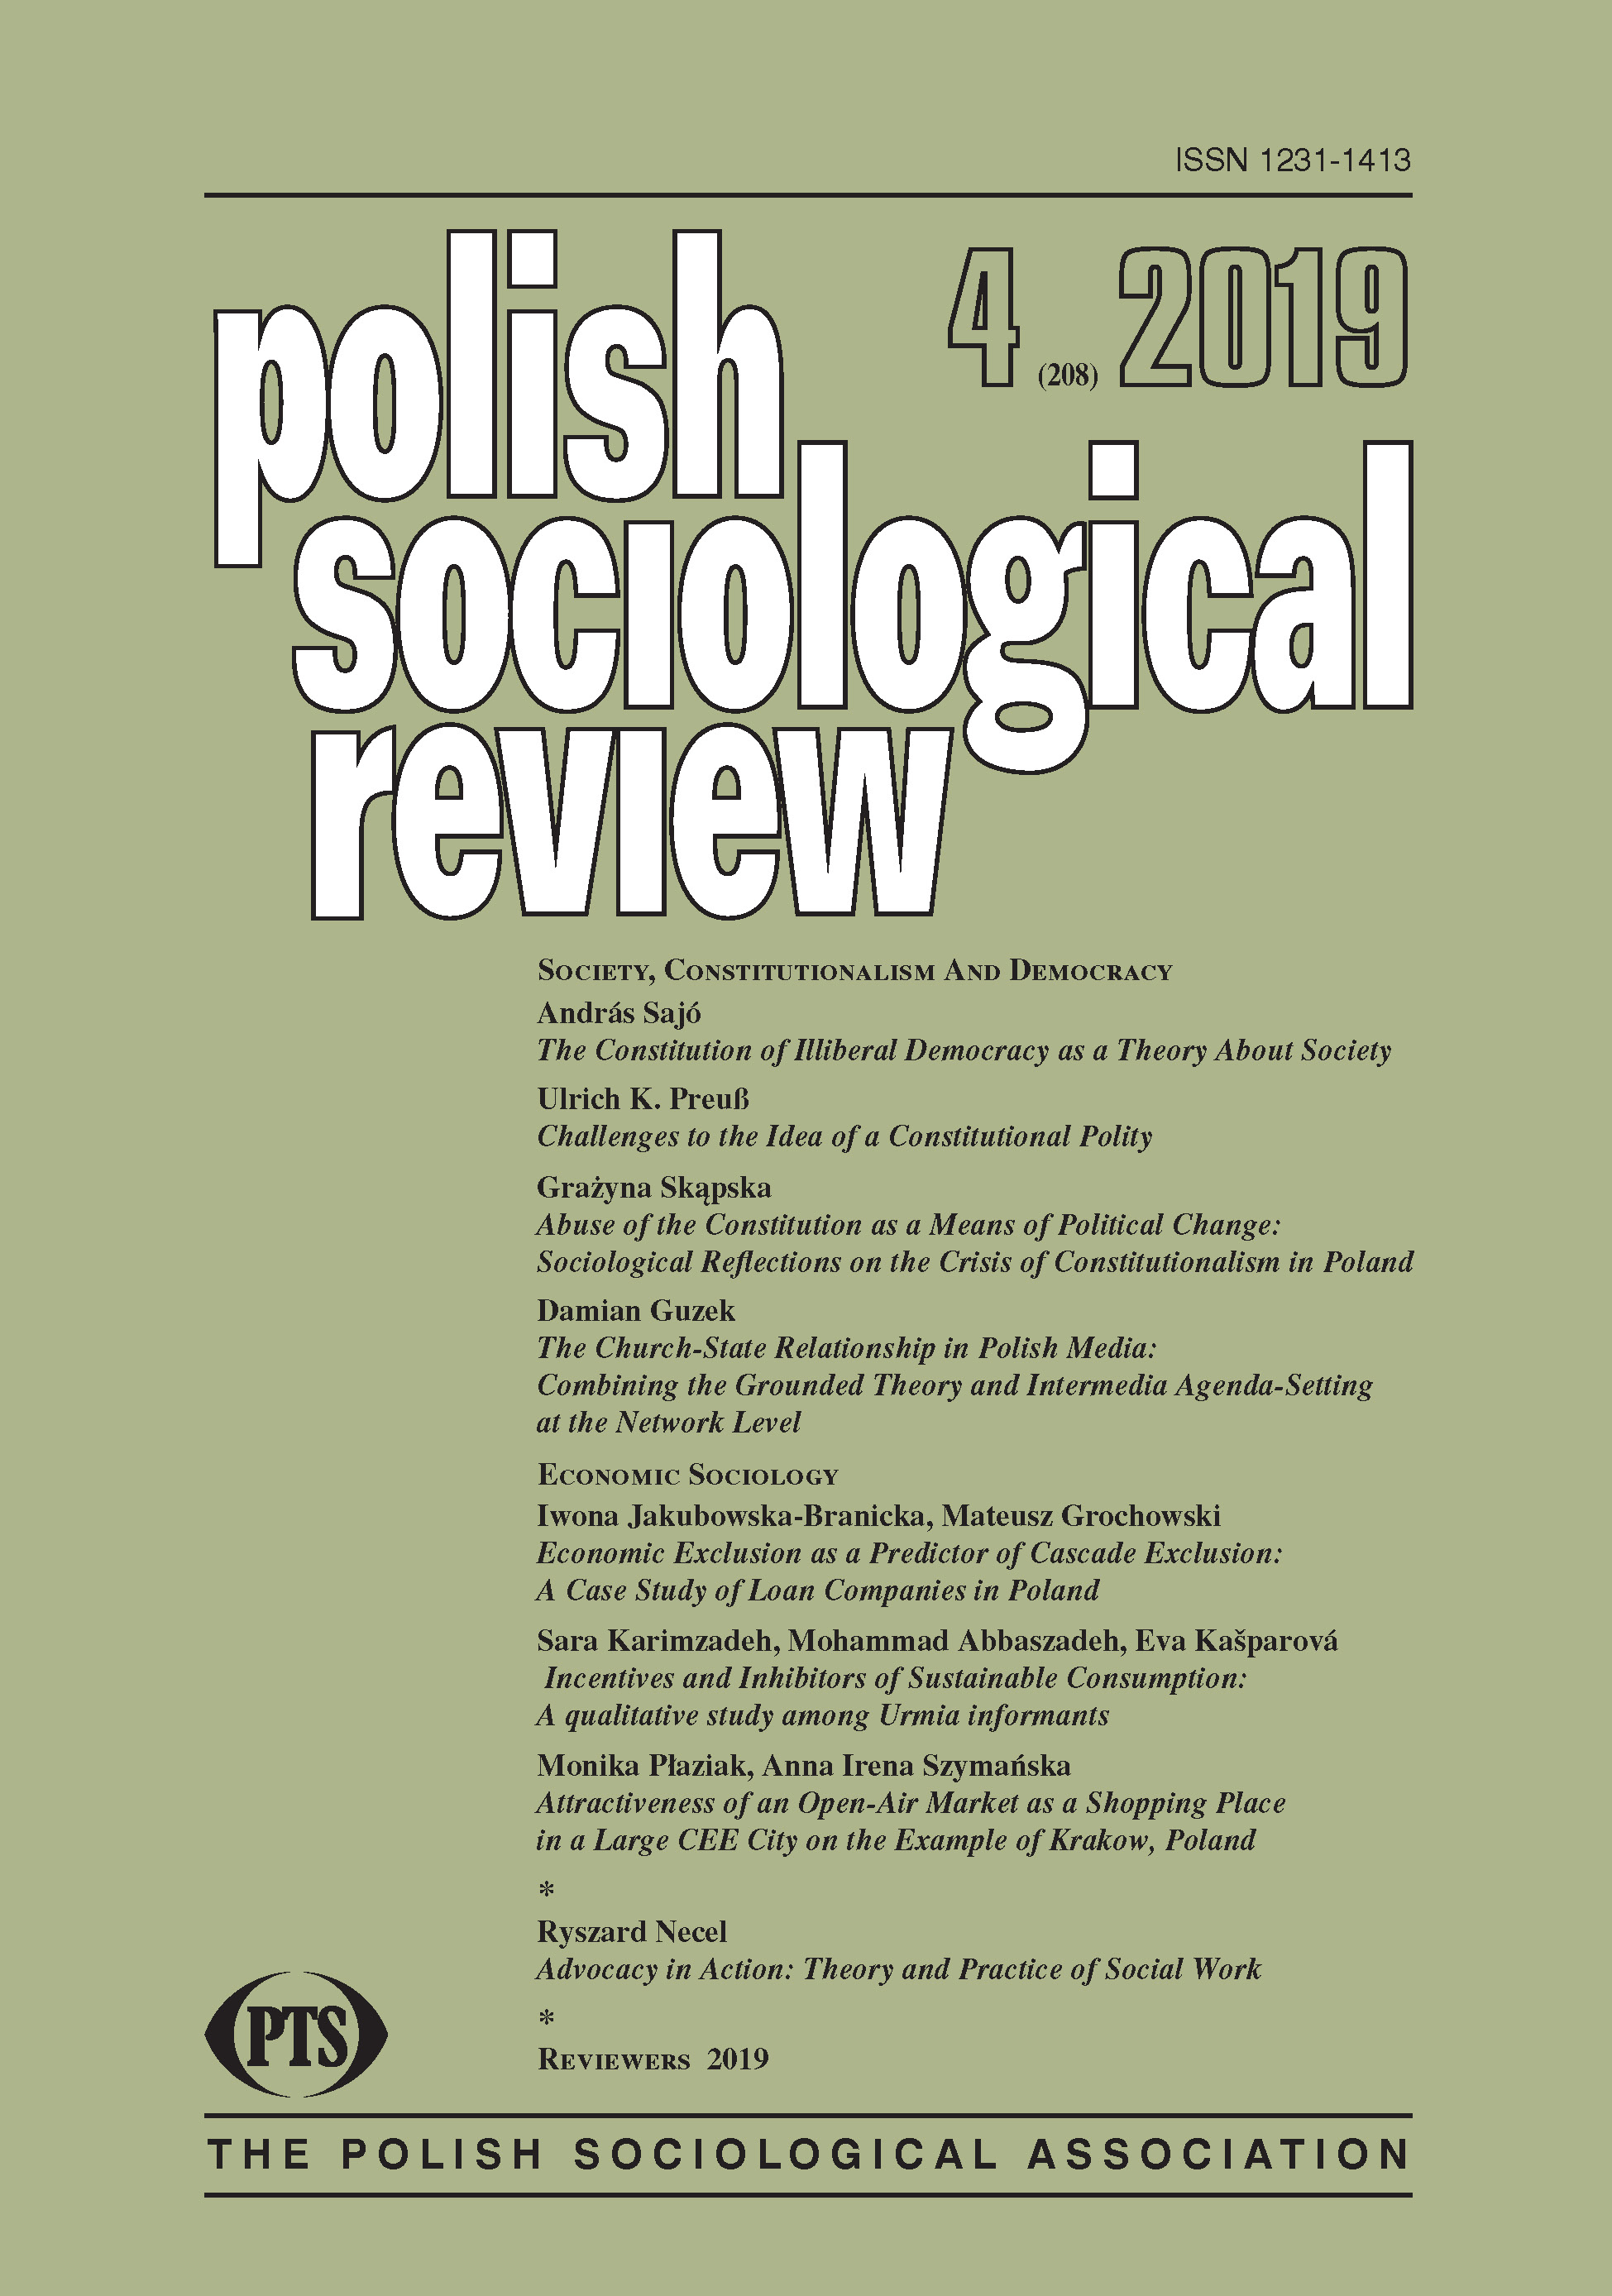 Economic Exclusion as a Predictor of Cascade Exclusion:
A Case Study of Loan Companies in Poland Cover Image